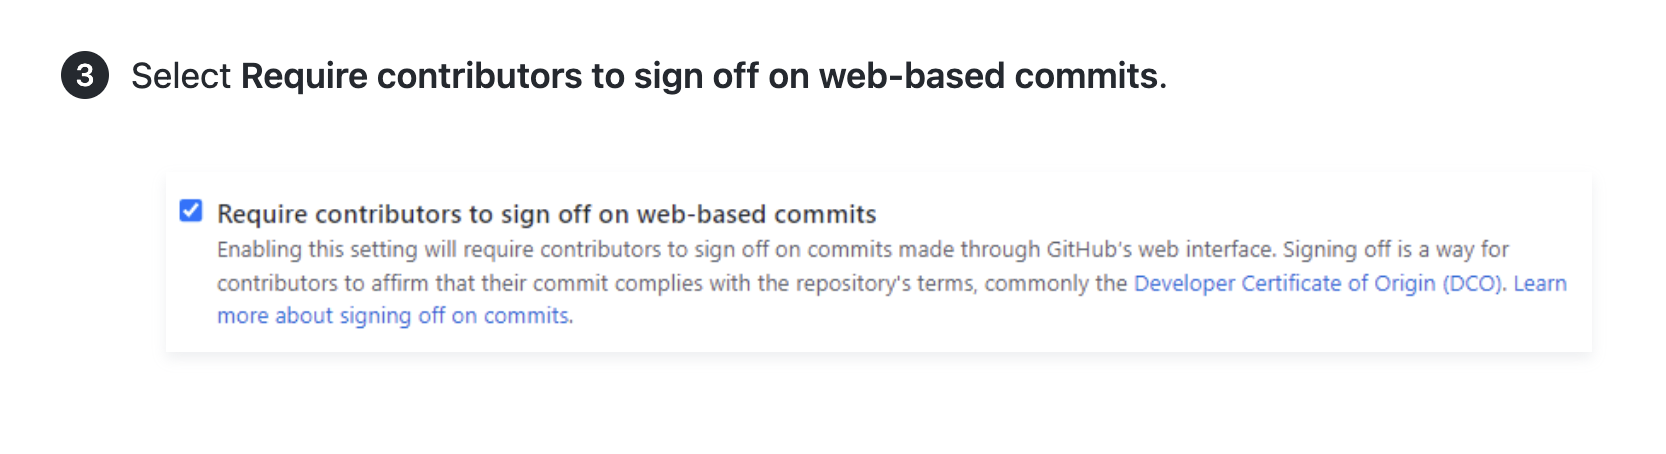 Screenshot of an article showing instructions and a UI screenshot for requiring contributors to sign off on web-based commits.